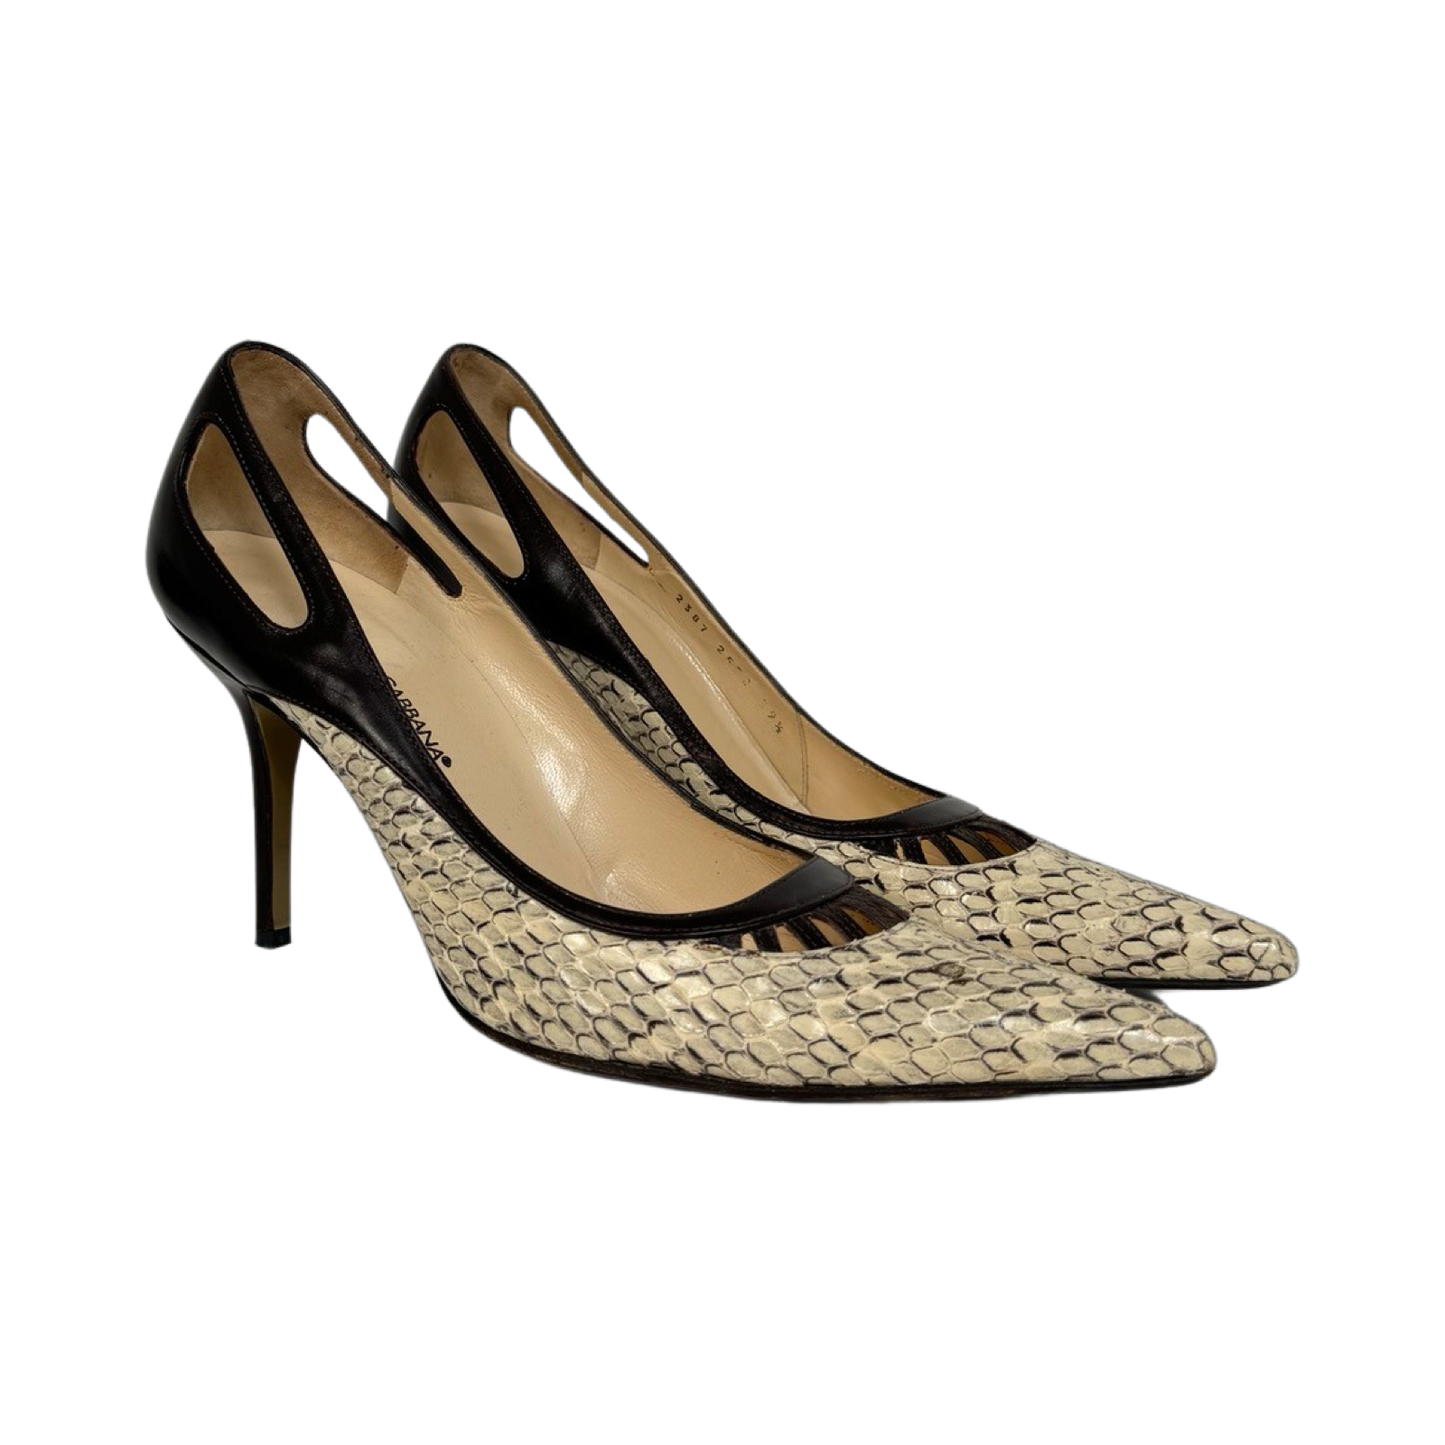 Dolce & Gabbana Python and Leather Pointed Toe Pumps (Size 39.5)